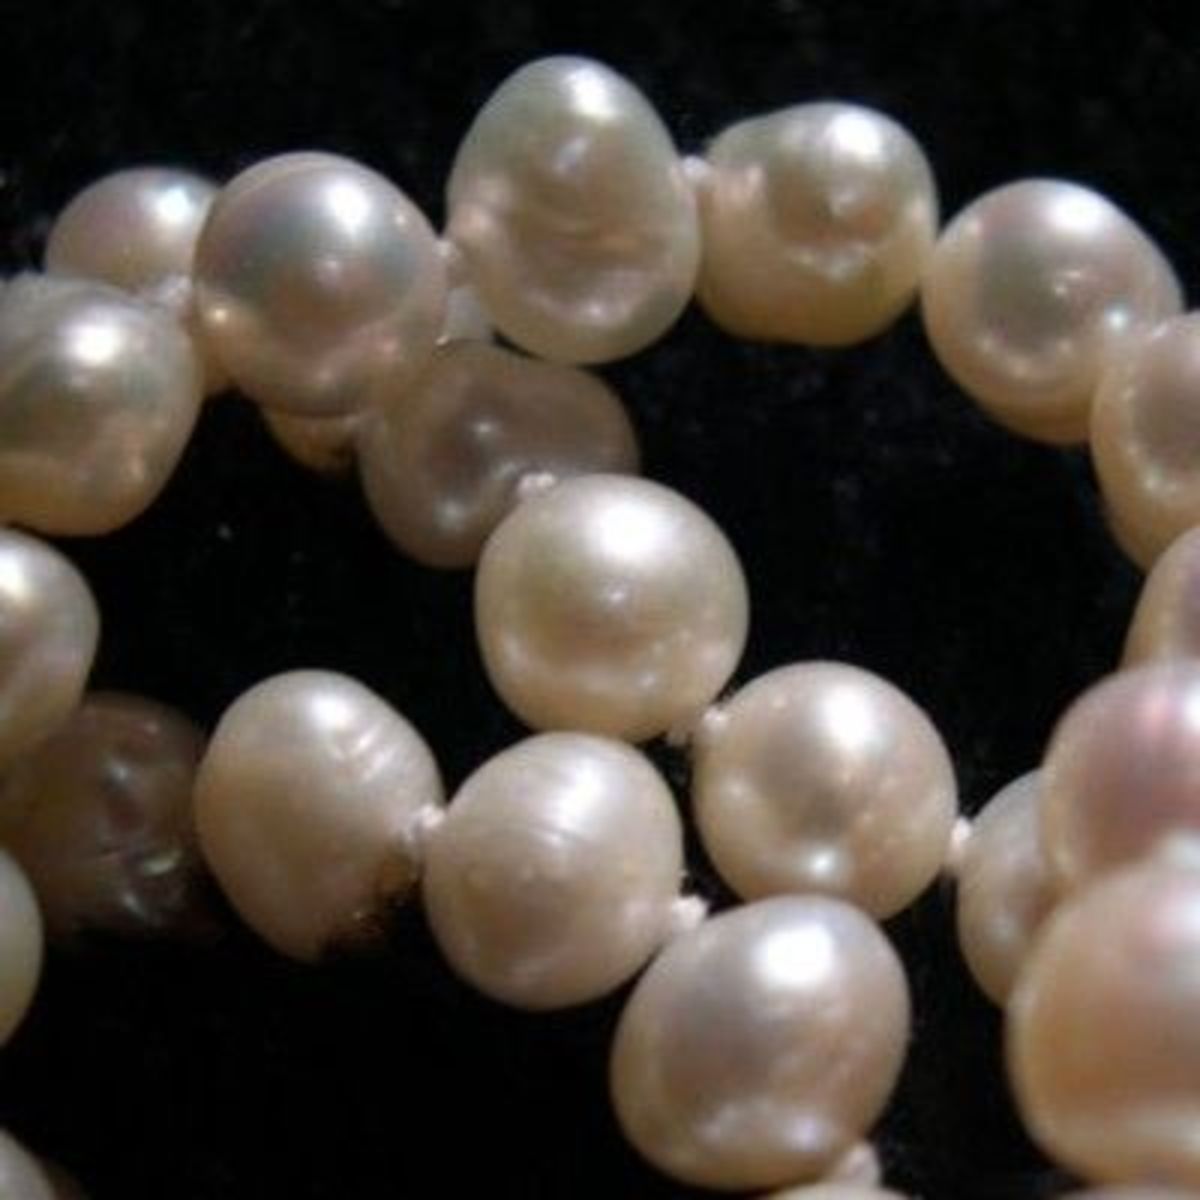 These pearls are real. Telltale signs include surface imperfections, shape irregularities, color gradients in the nacre, luster, and the knots between each gem.